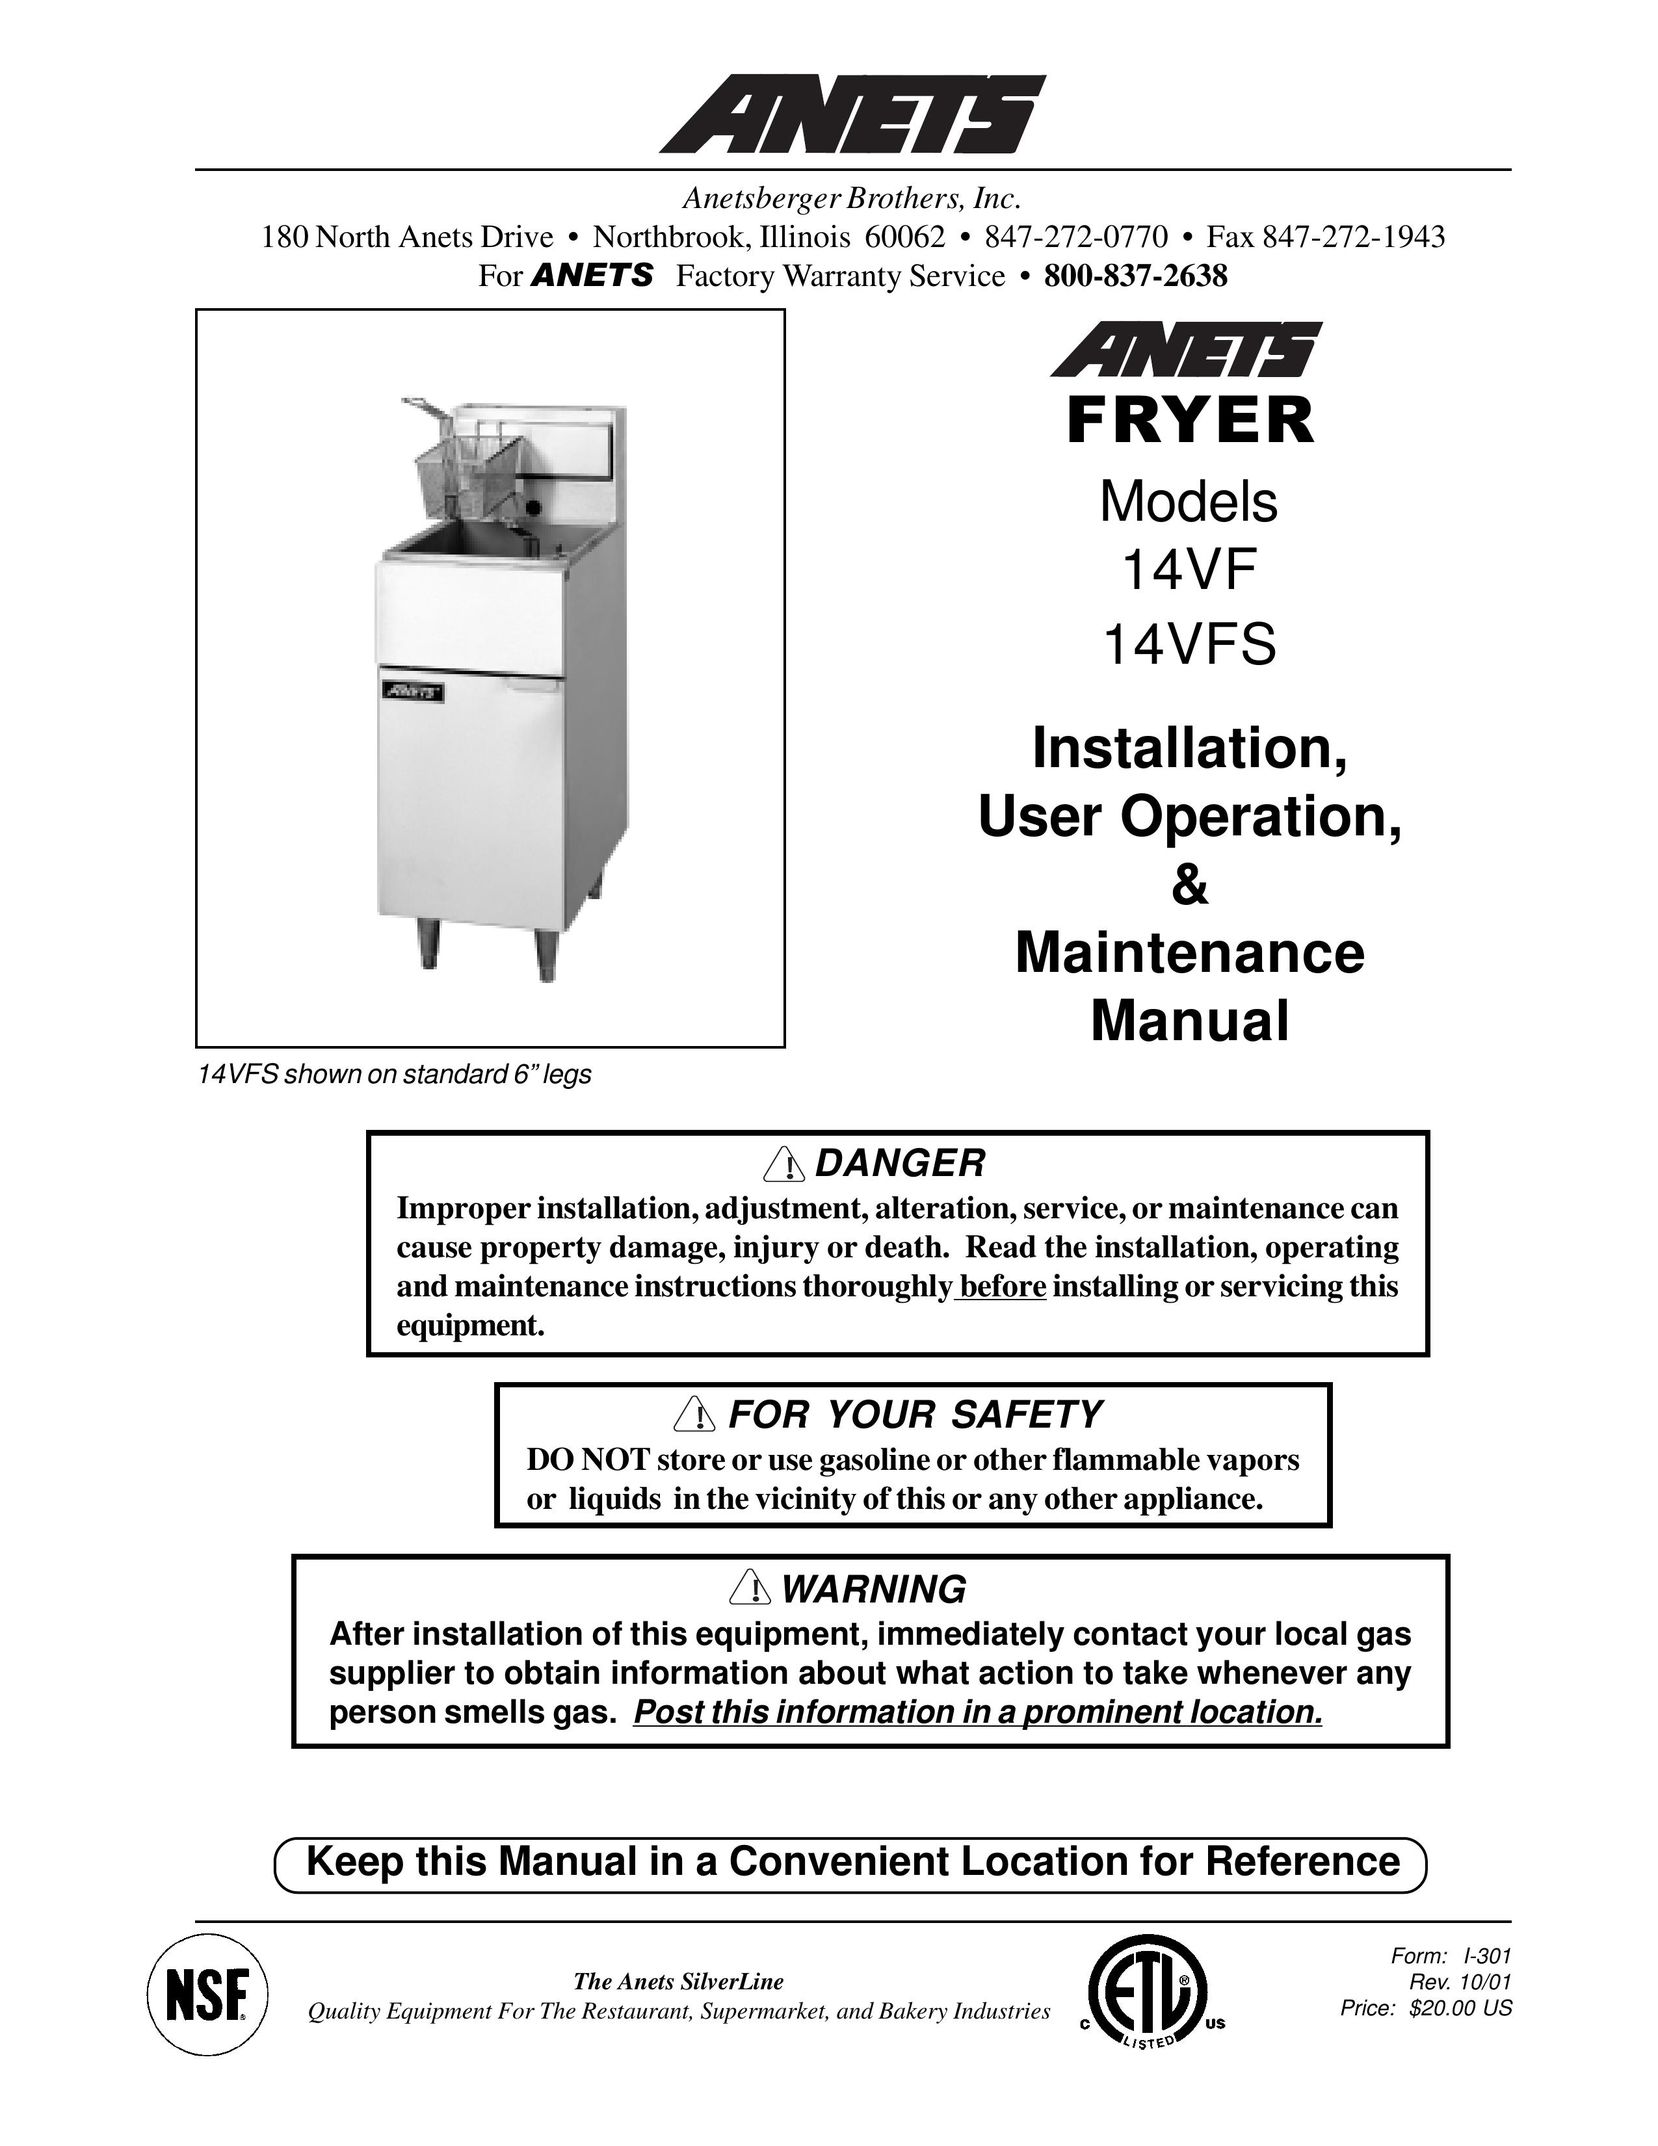 Anetsberger Brothers 14VFS Fryer User Manual